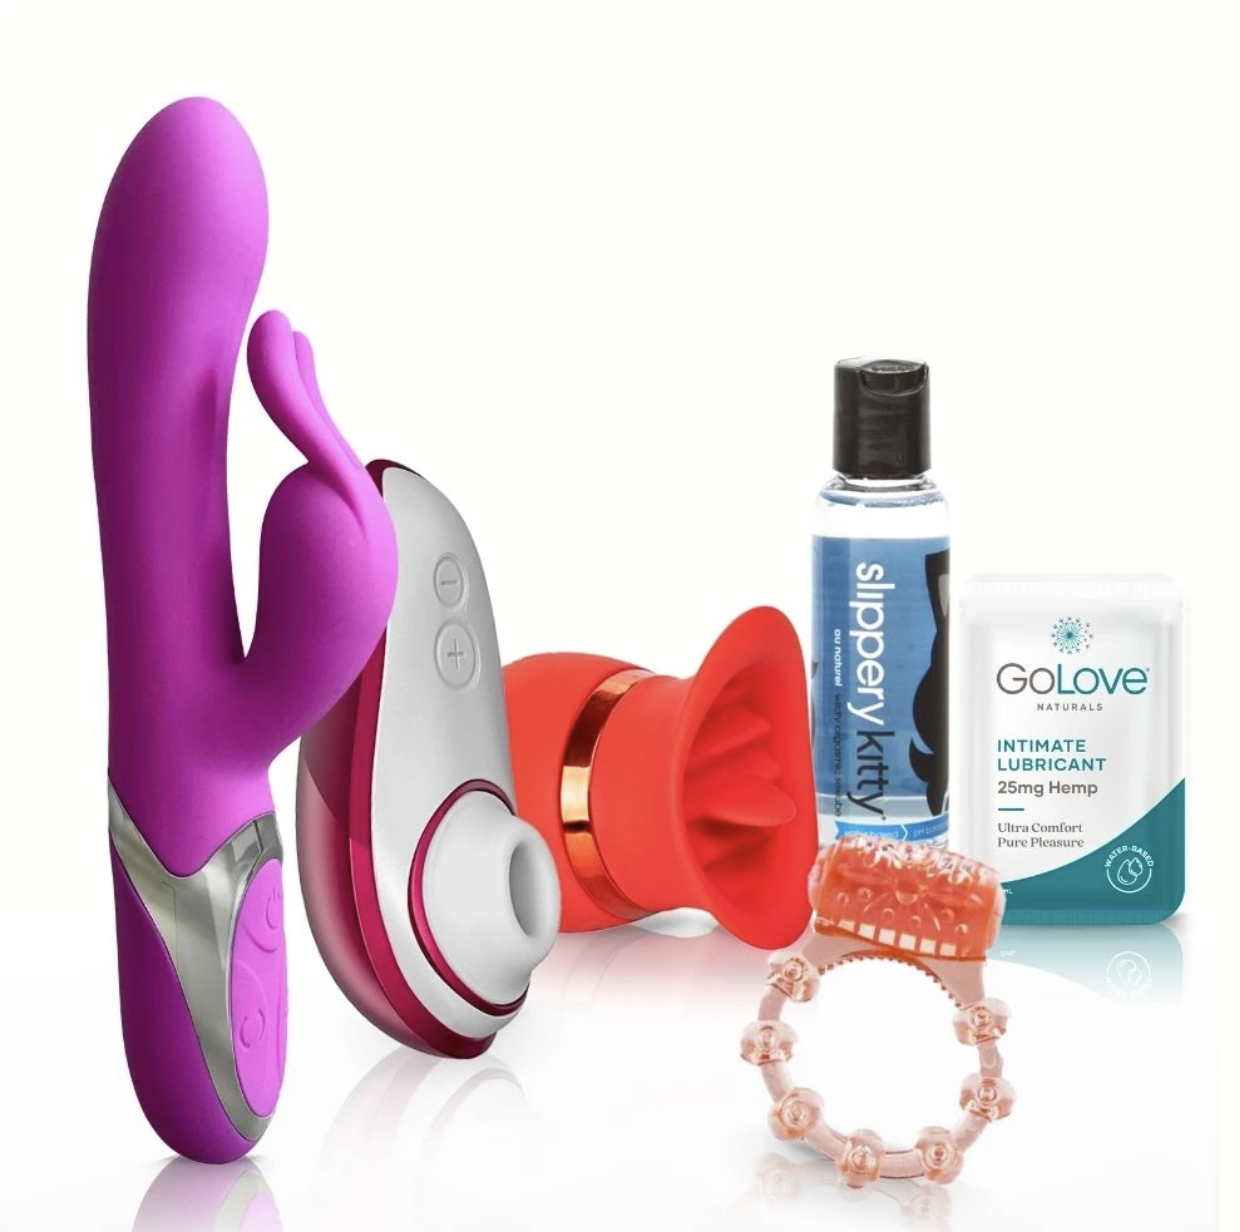 Tickle kitty shot of love gift set featuring four vibrating sex toys and two lubes.